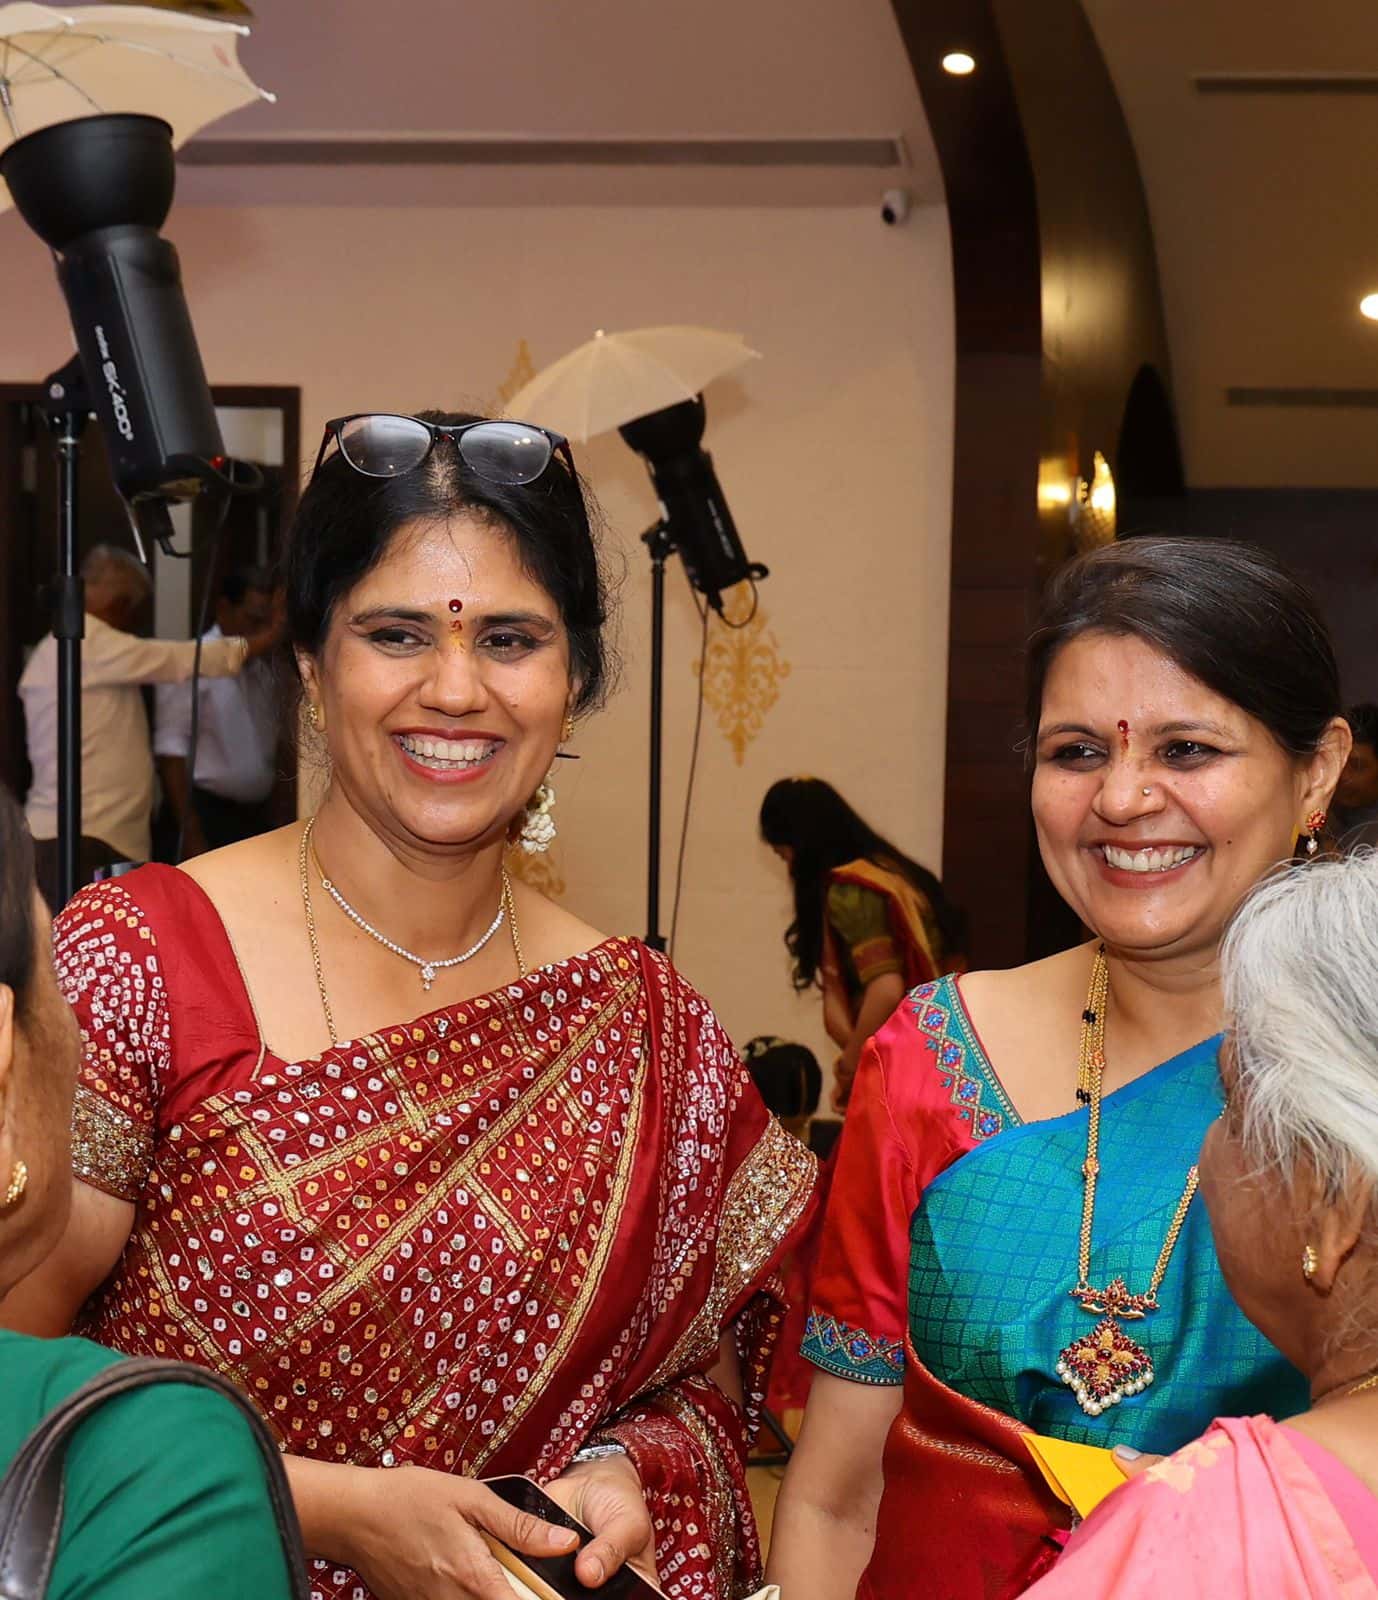 Bengaluru mothers Anupama Harish and Charulatha R hosted a low-waste plastic-free wedding for their children 